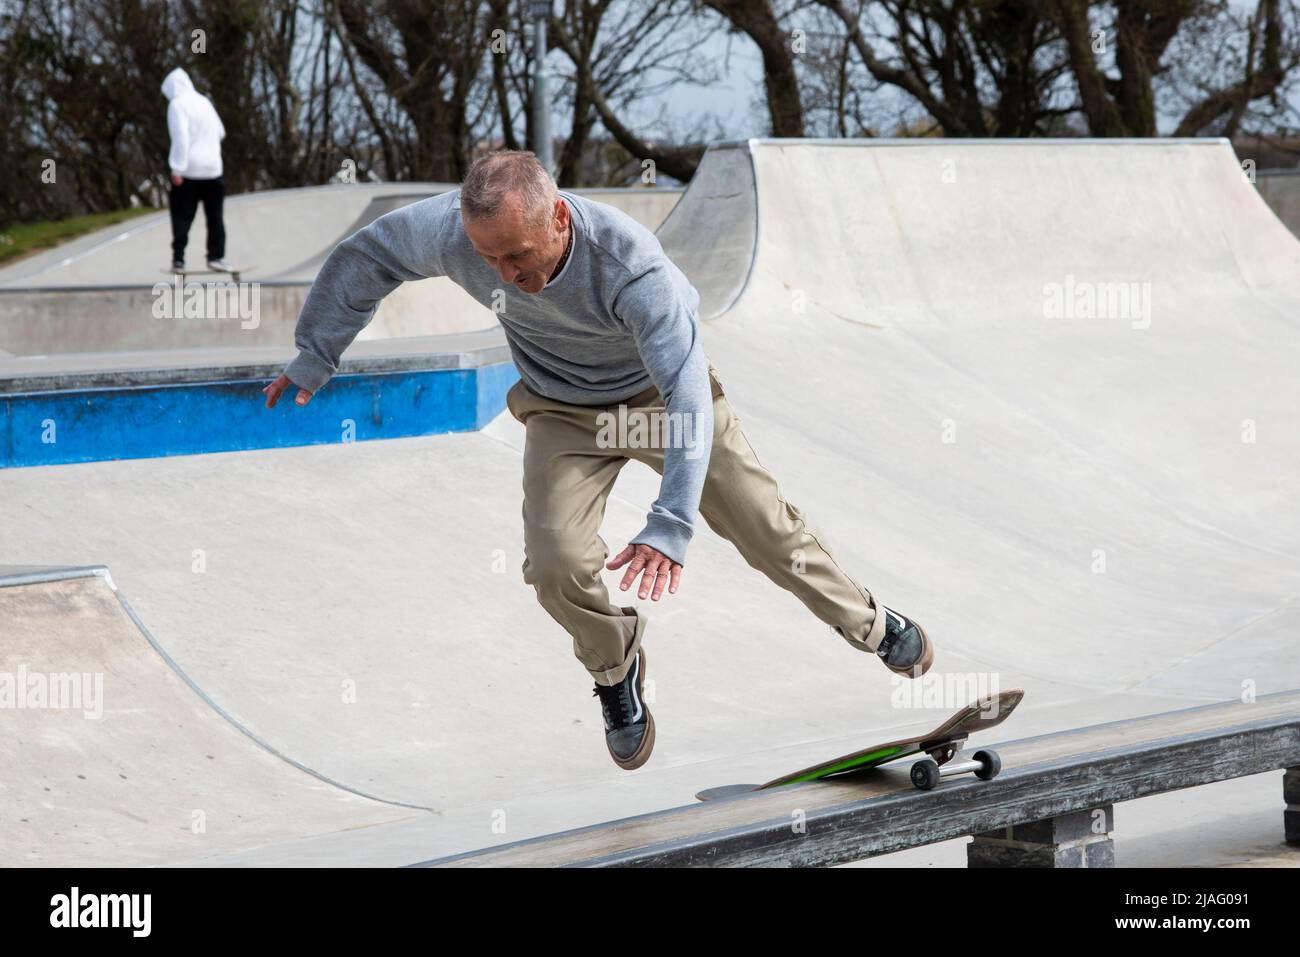 A mature male skateboarder attempting to perform a boardslide railslide trick and failing at Newquay Concrete Waves Skatepark in Newquay in Cornwall i Stock Photo